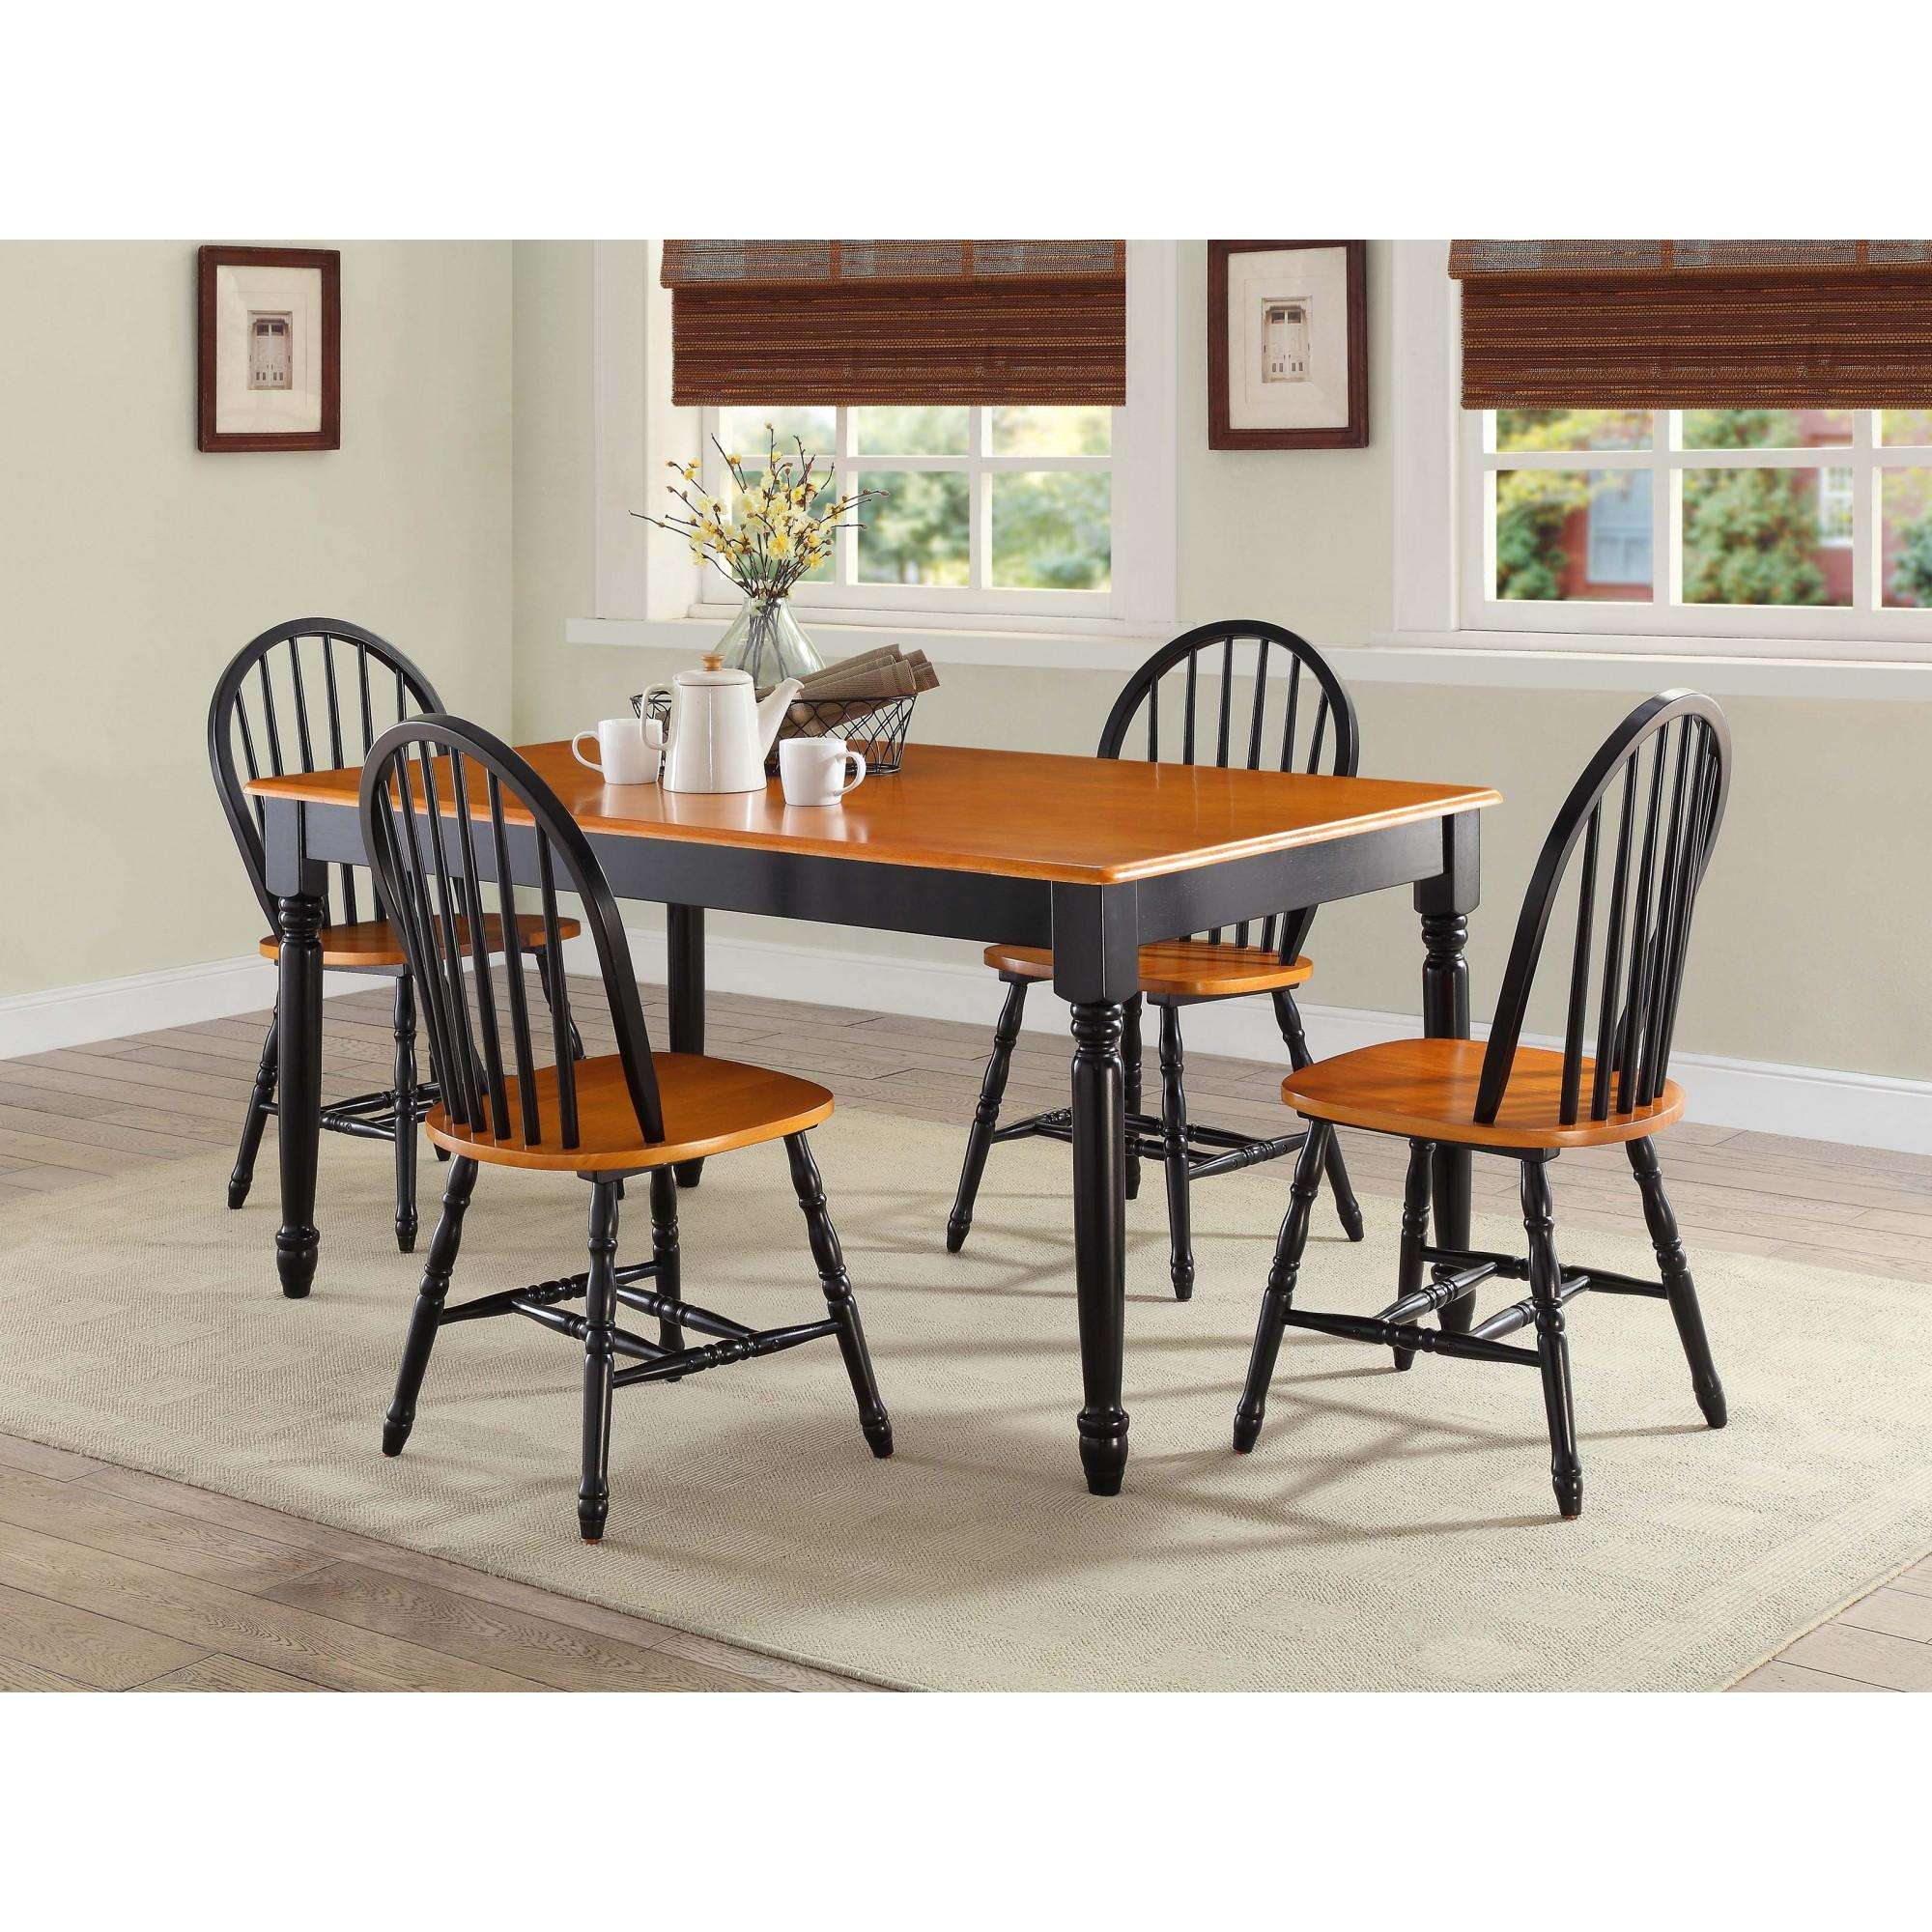 Better Homes and Gardens Autumn Lane Windsor Solid Wood Chairs, Set of 2, Black and Oak - image 6 of 8